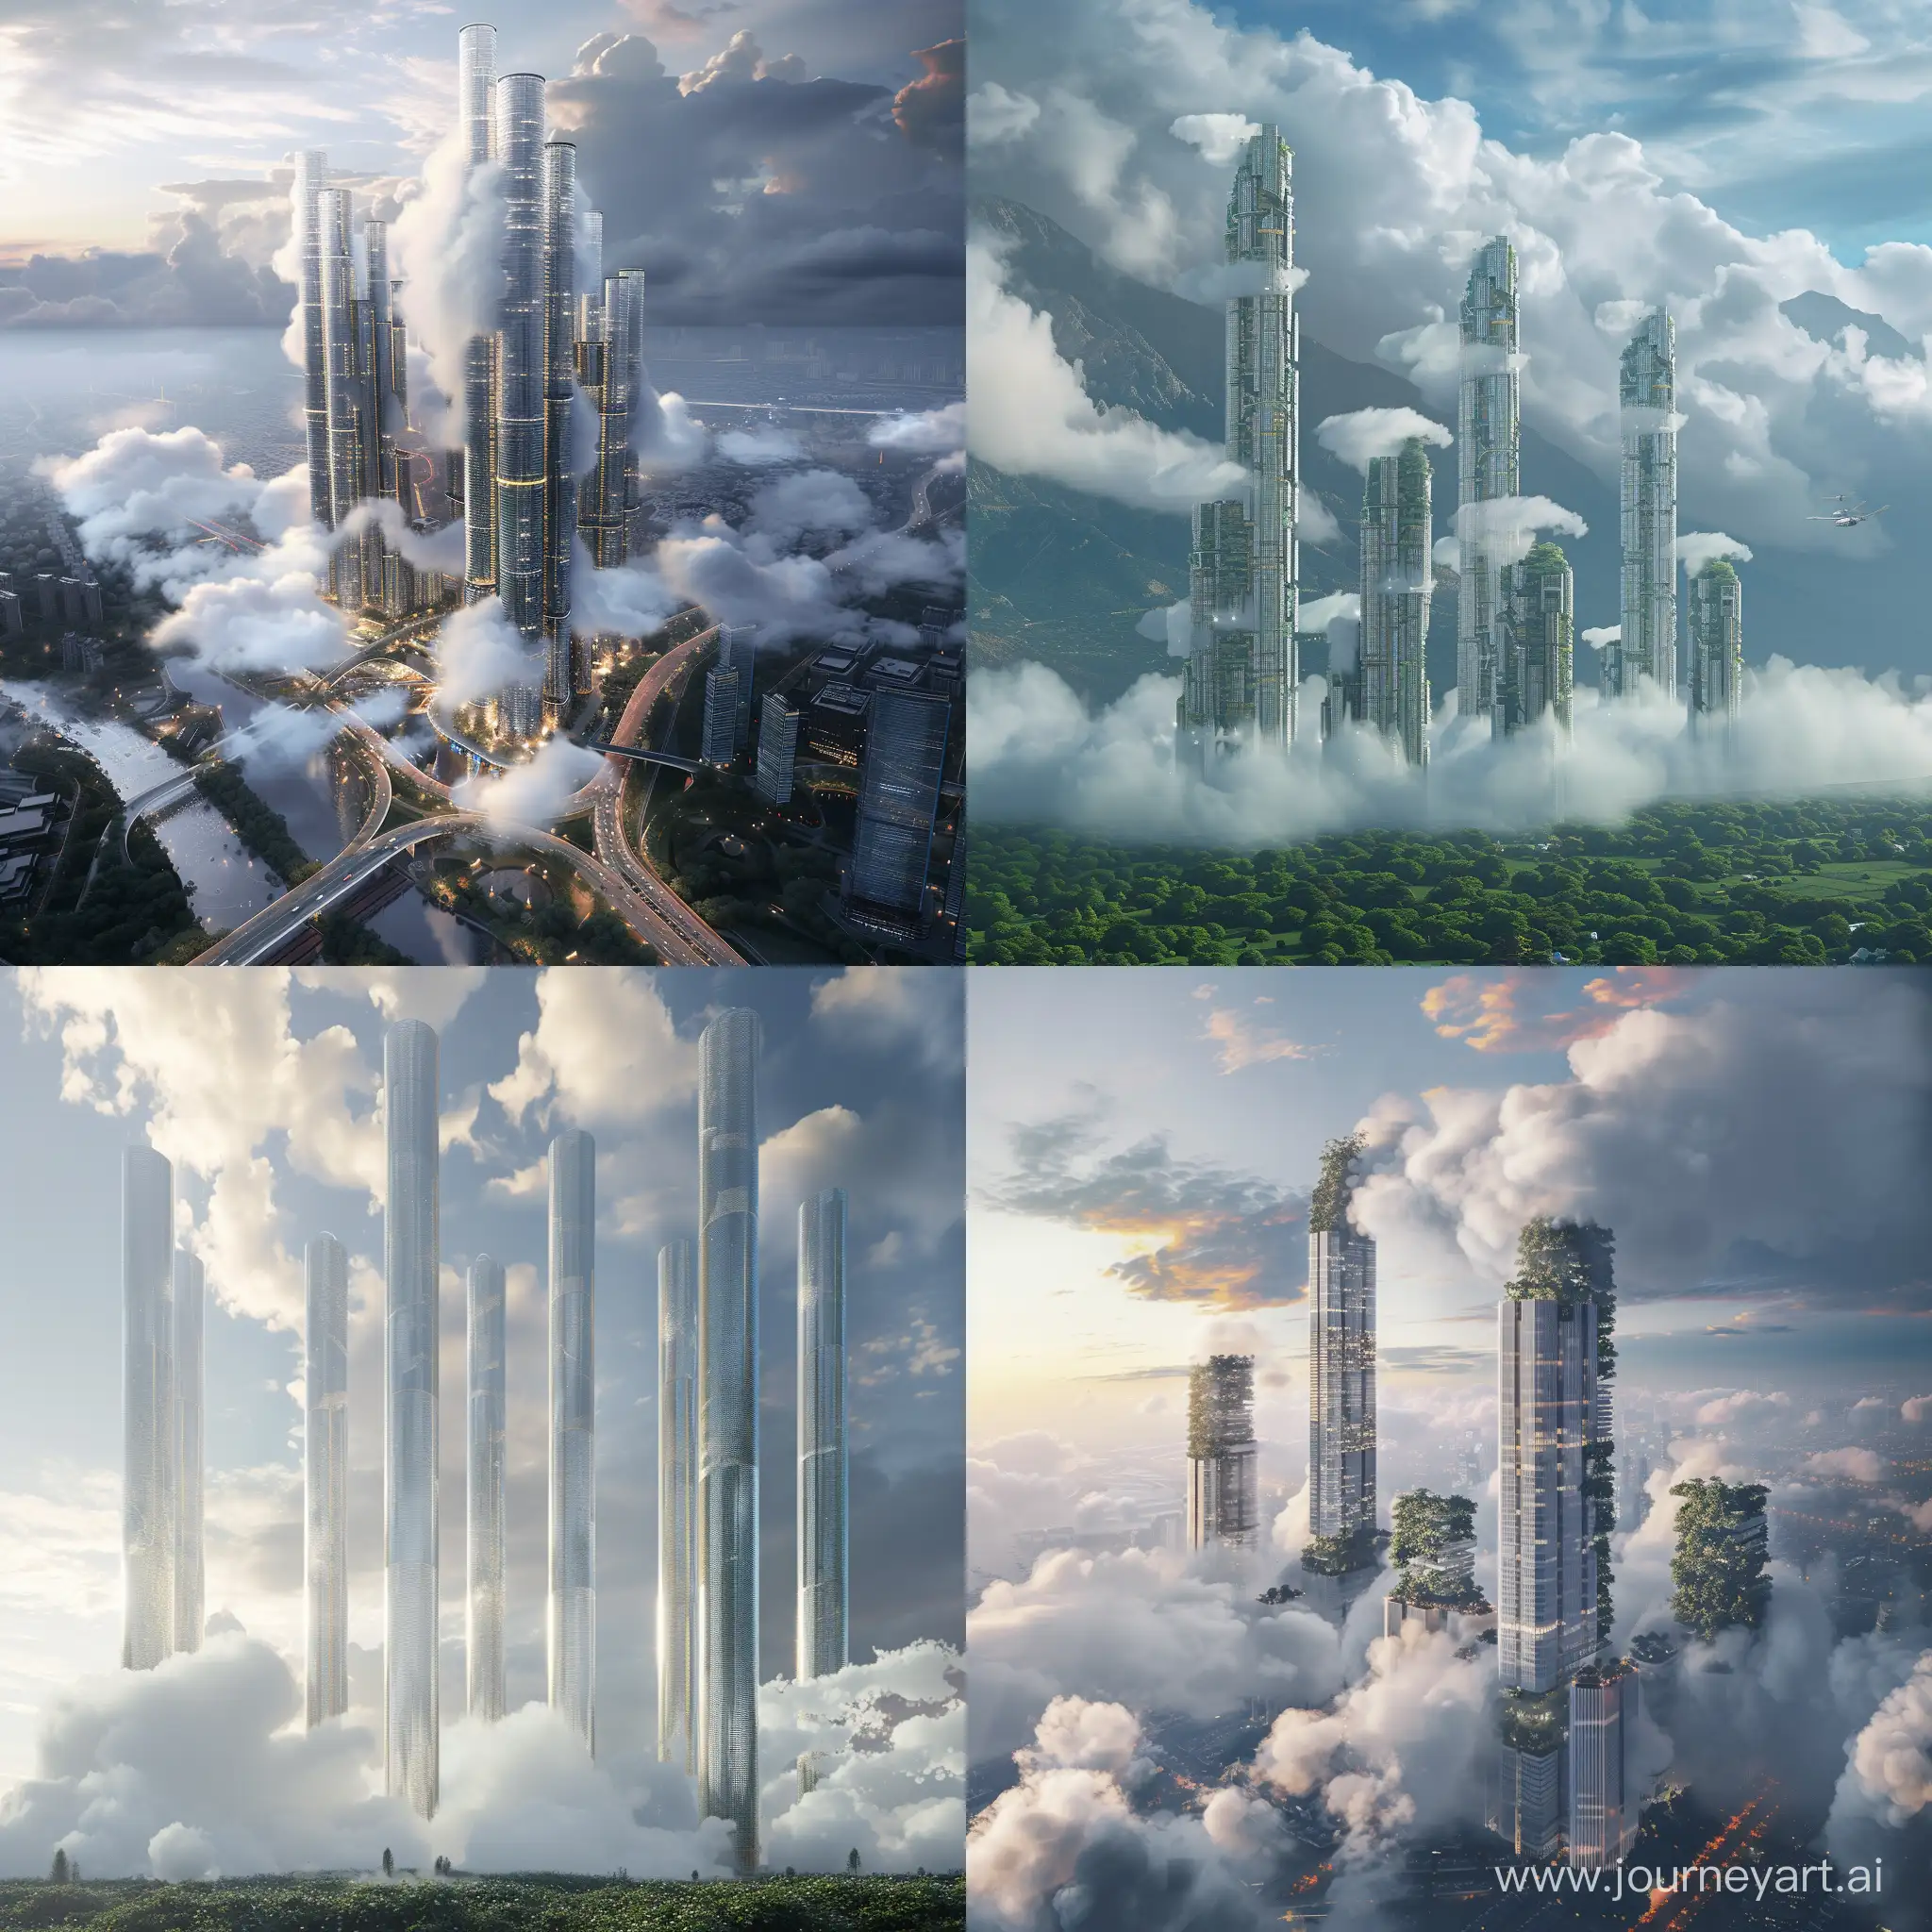 Majestic-CloudLike-Towers-Reaching-to-the-Sky